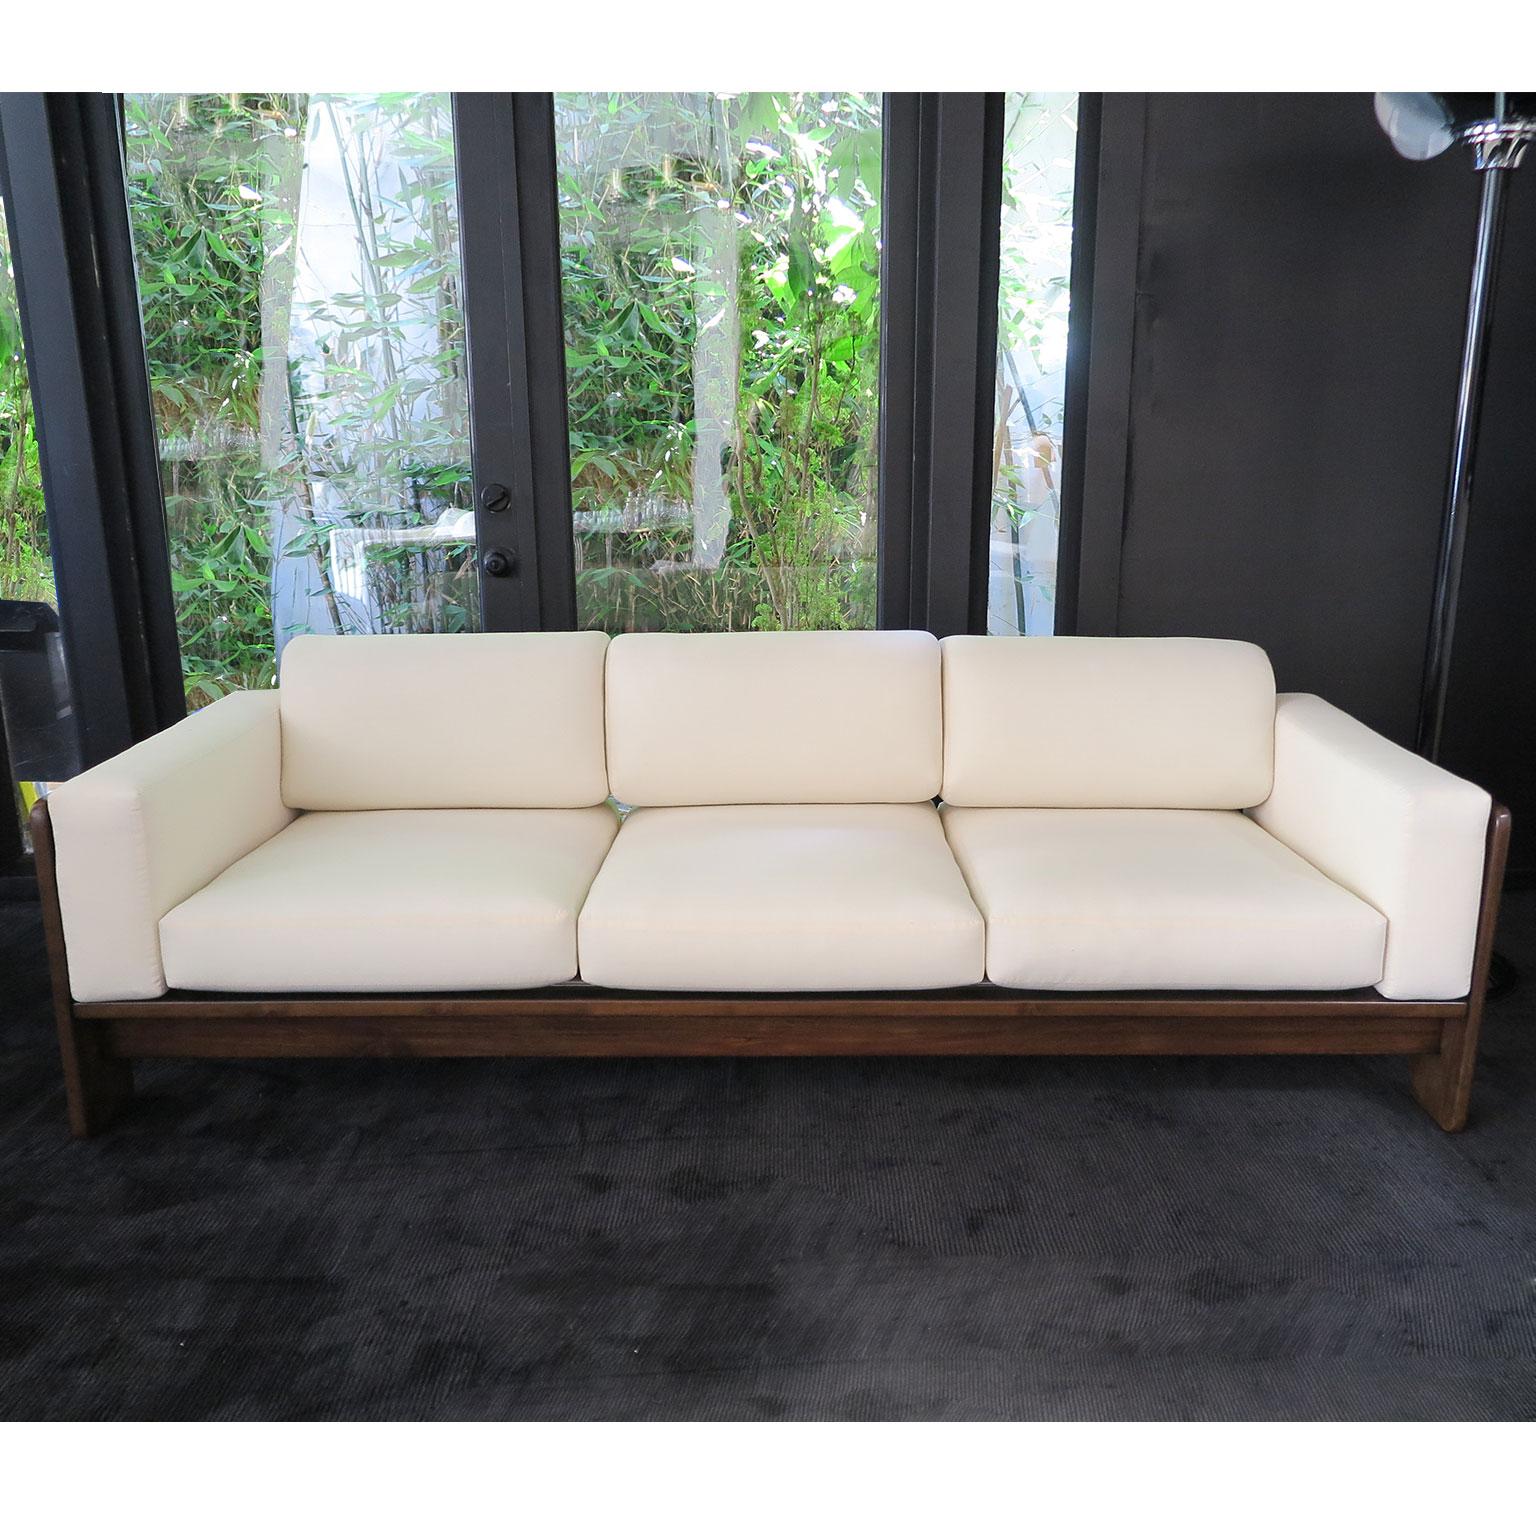 Midcentury, wooden three-seat sofa with thin frame in a matte finish. Newly upholstered in muslin for custom fabric or leather. 